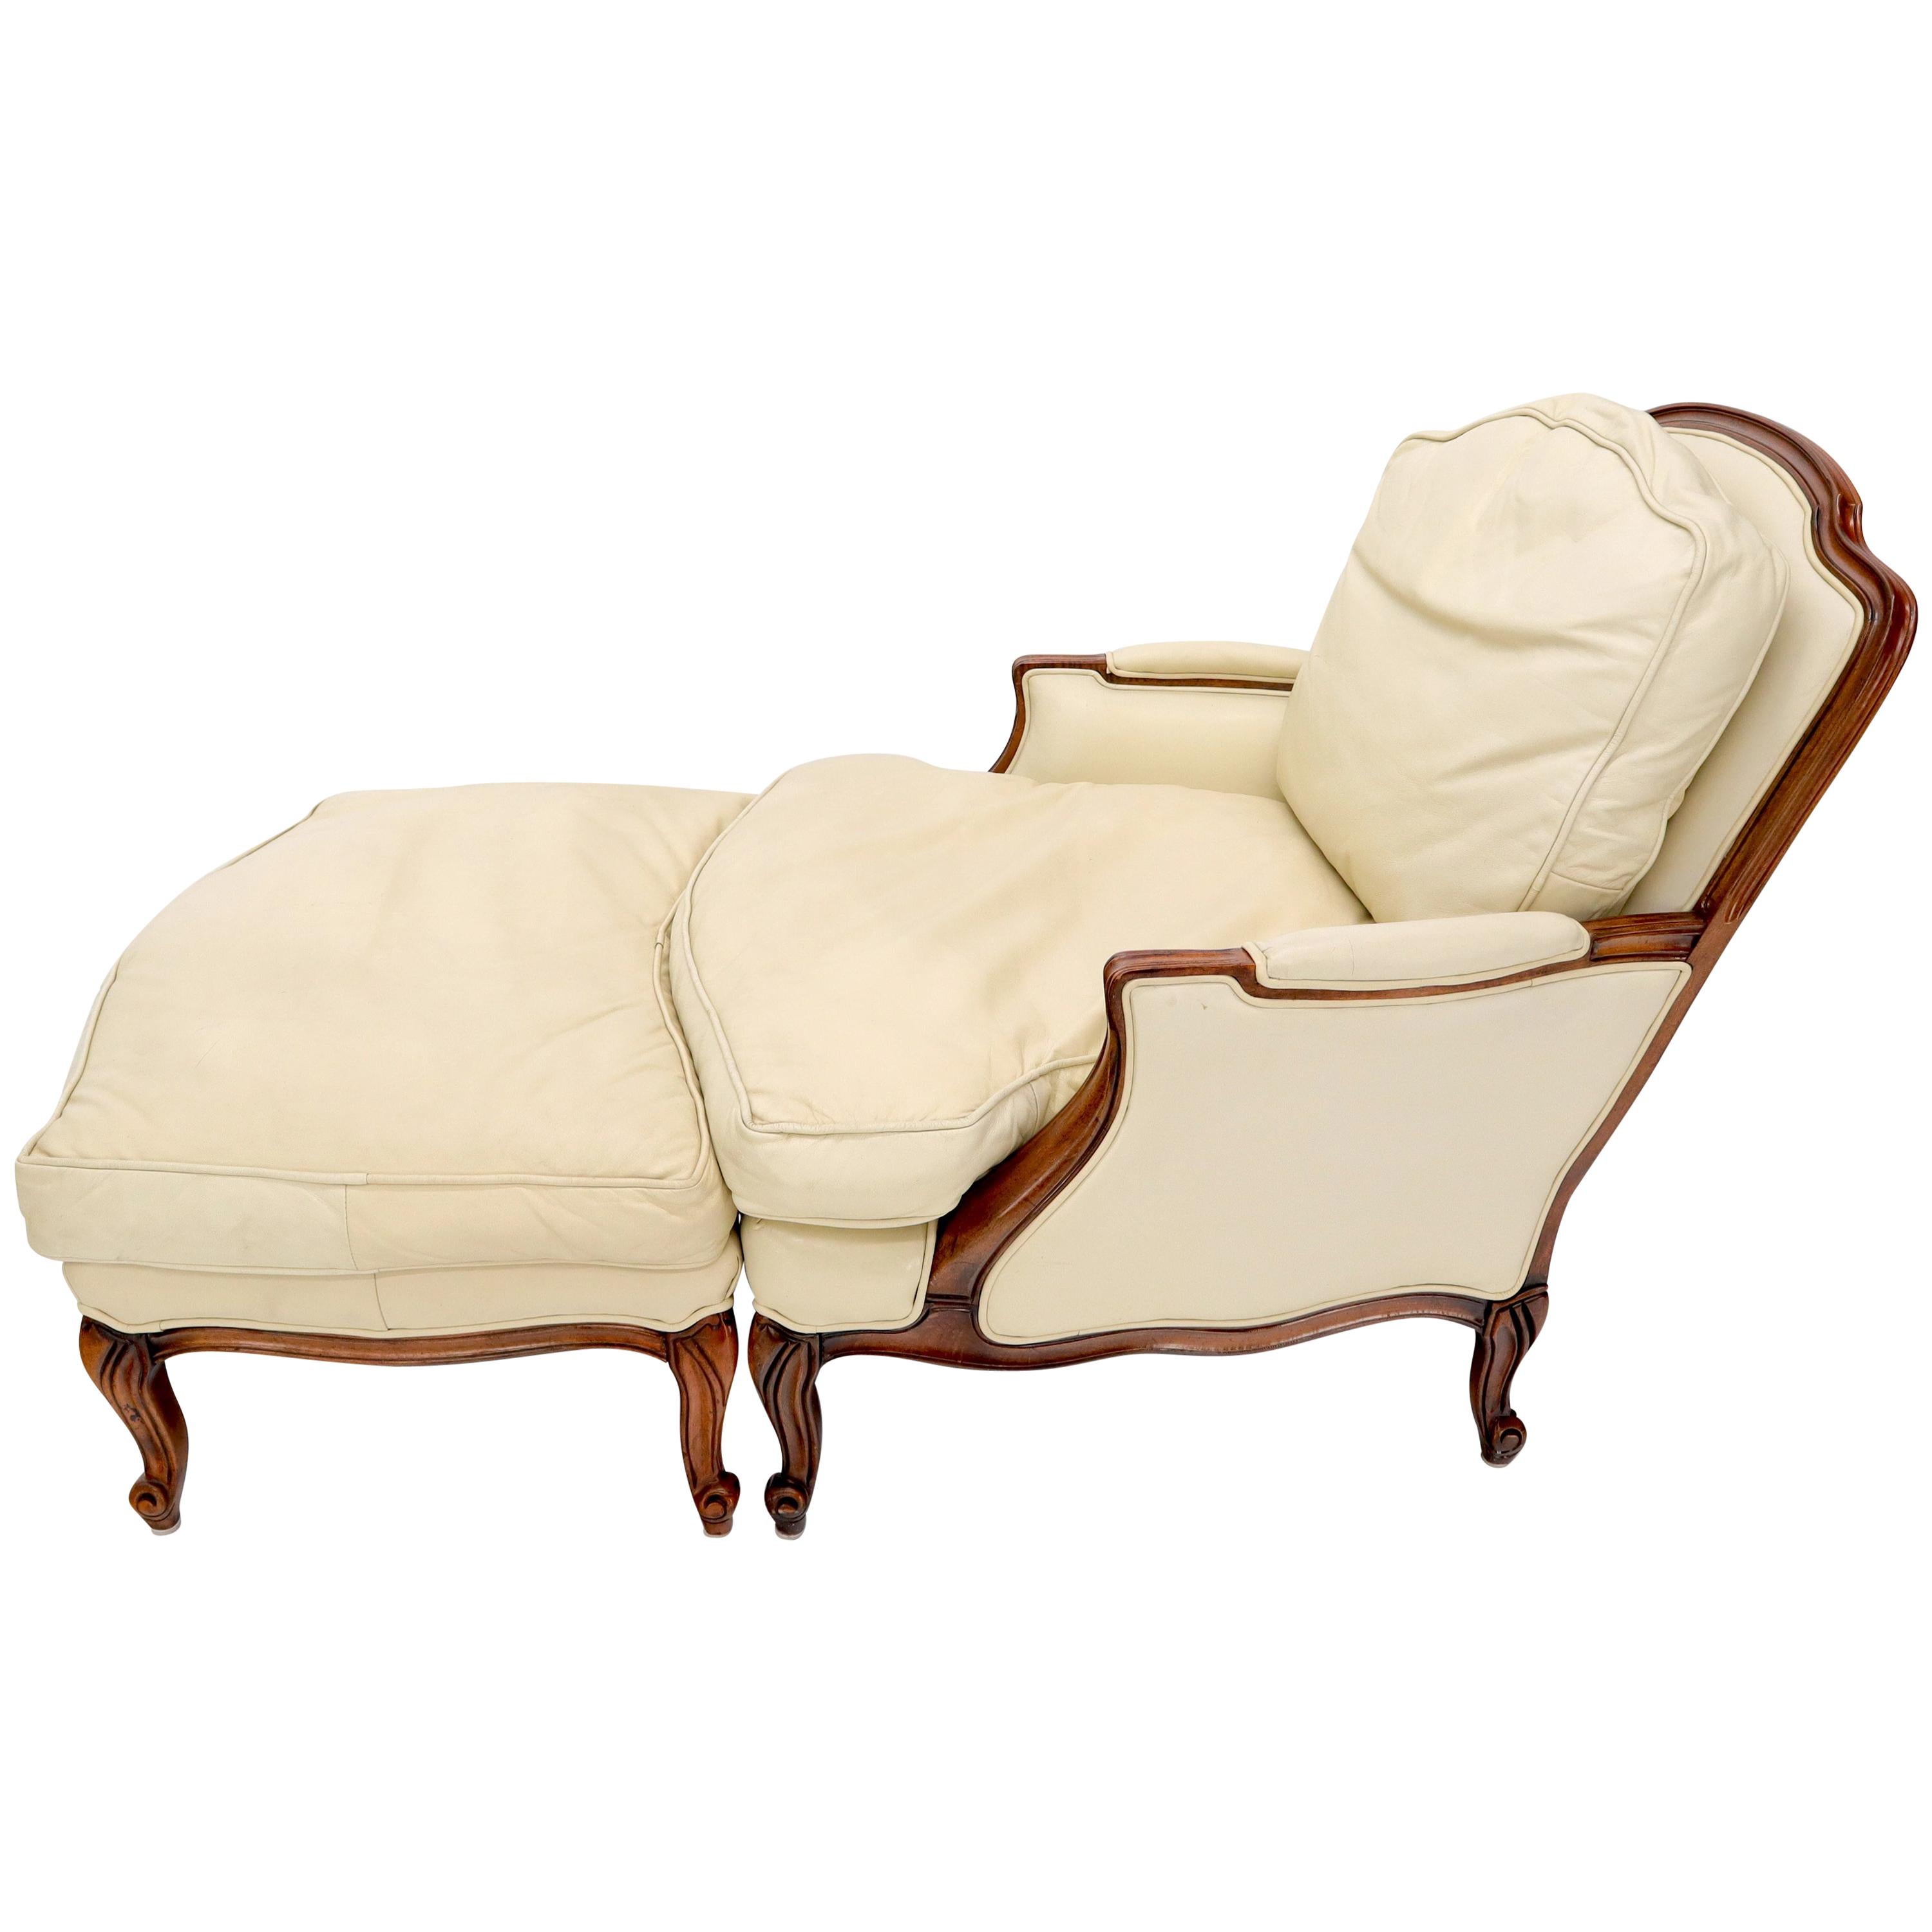 Cream Leather Chaise 2-Part Chaise Lounge Chair and Ottoman